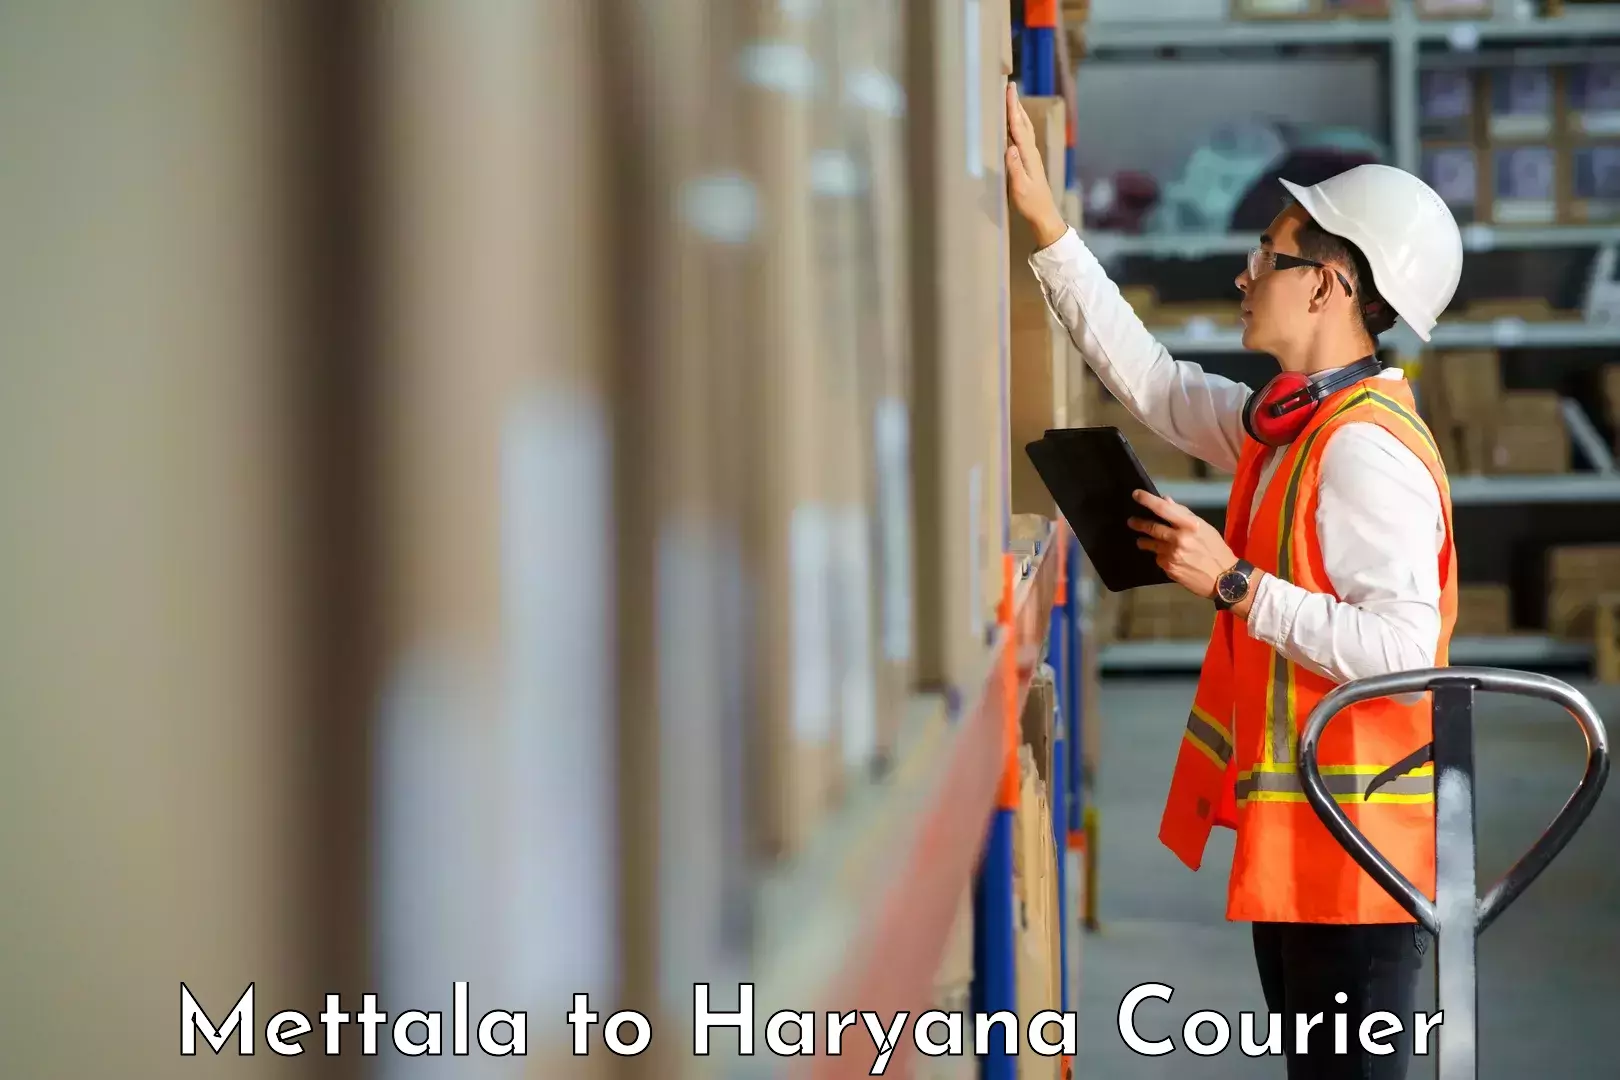 Courier dispatch services Mettala to Chaudhary Charan Singh Haryana Agricultural University Hisar